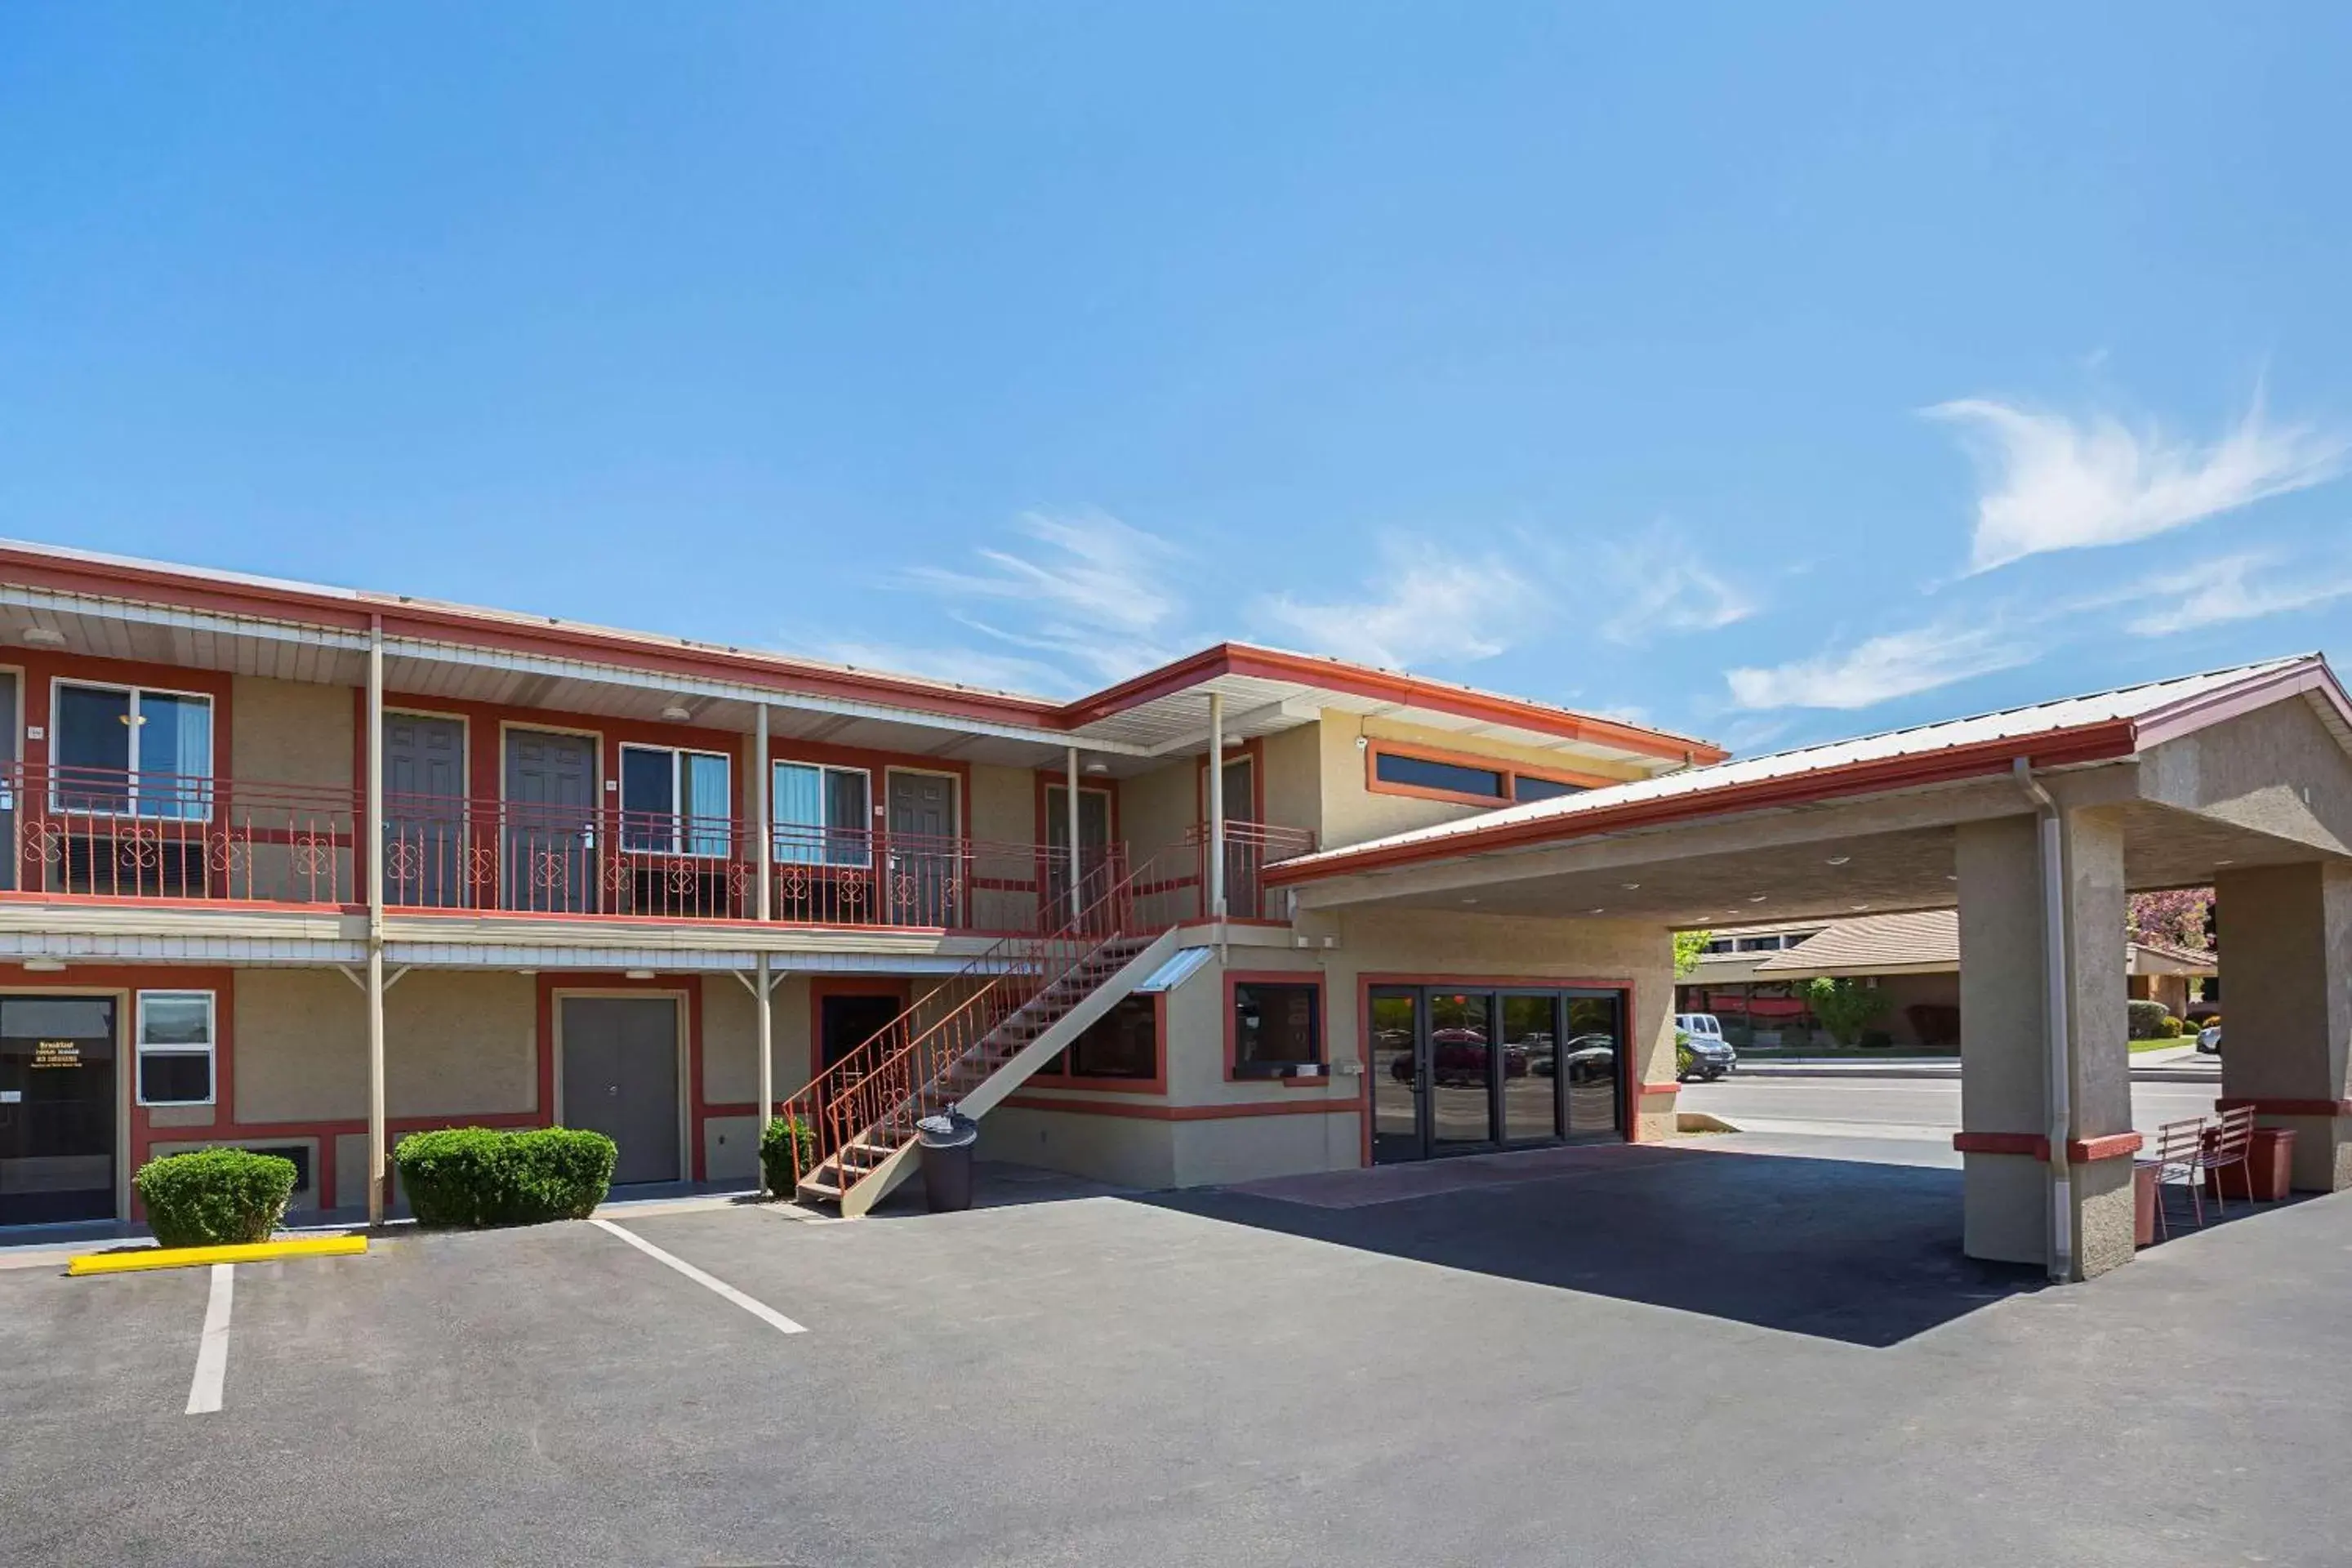 Property Building in Econo Lodge Hurricane - Zion National Park Area